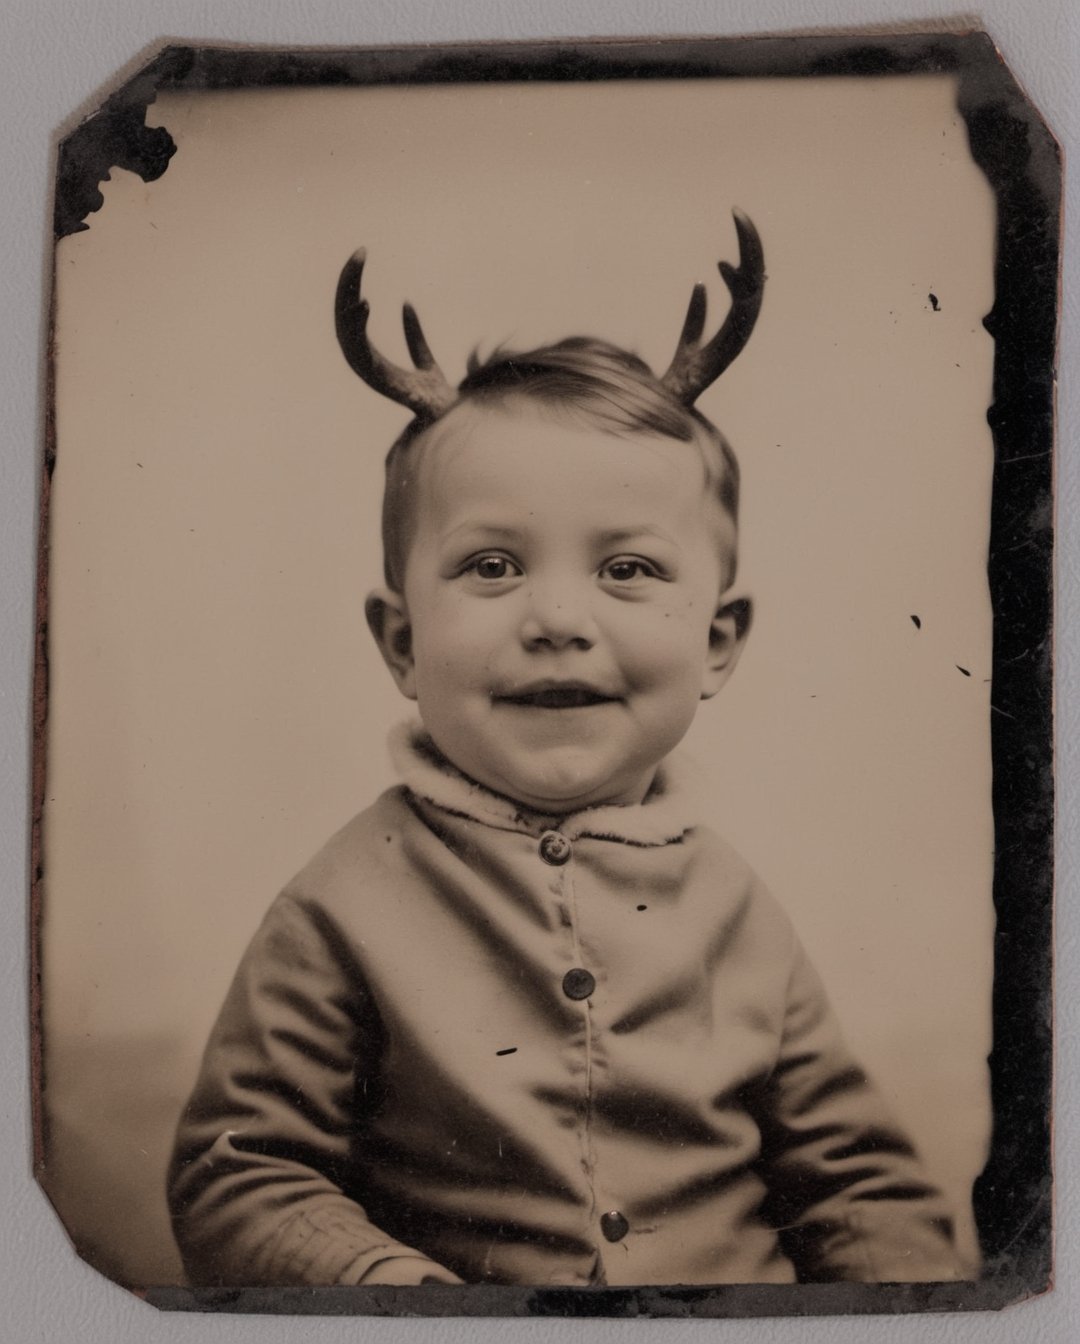 Tintype photograph of a happy toddler with small antlers, leica large format camera, Petzval 55mm F/5.6 Lens, sharp focus on face, realistic skin, highly detailed, tintime